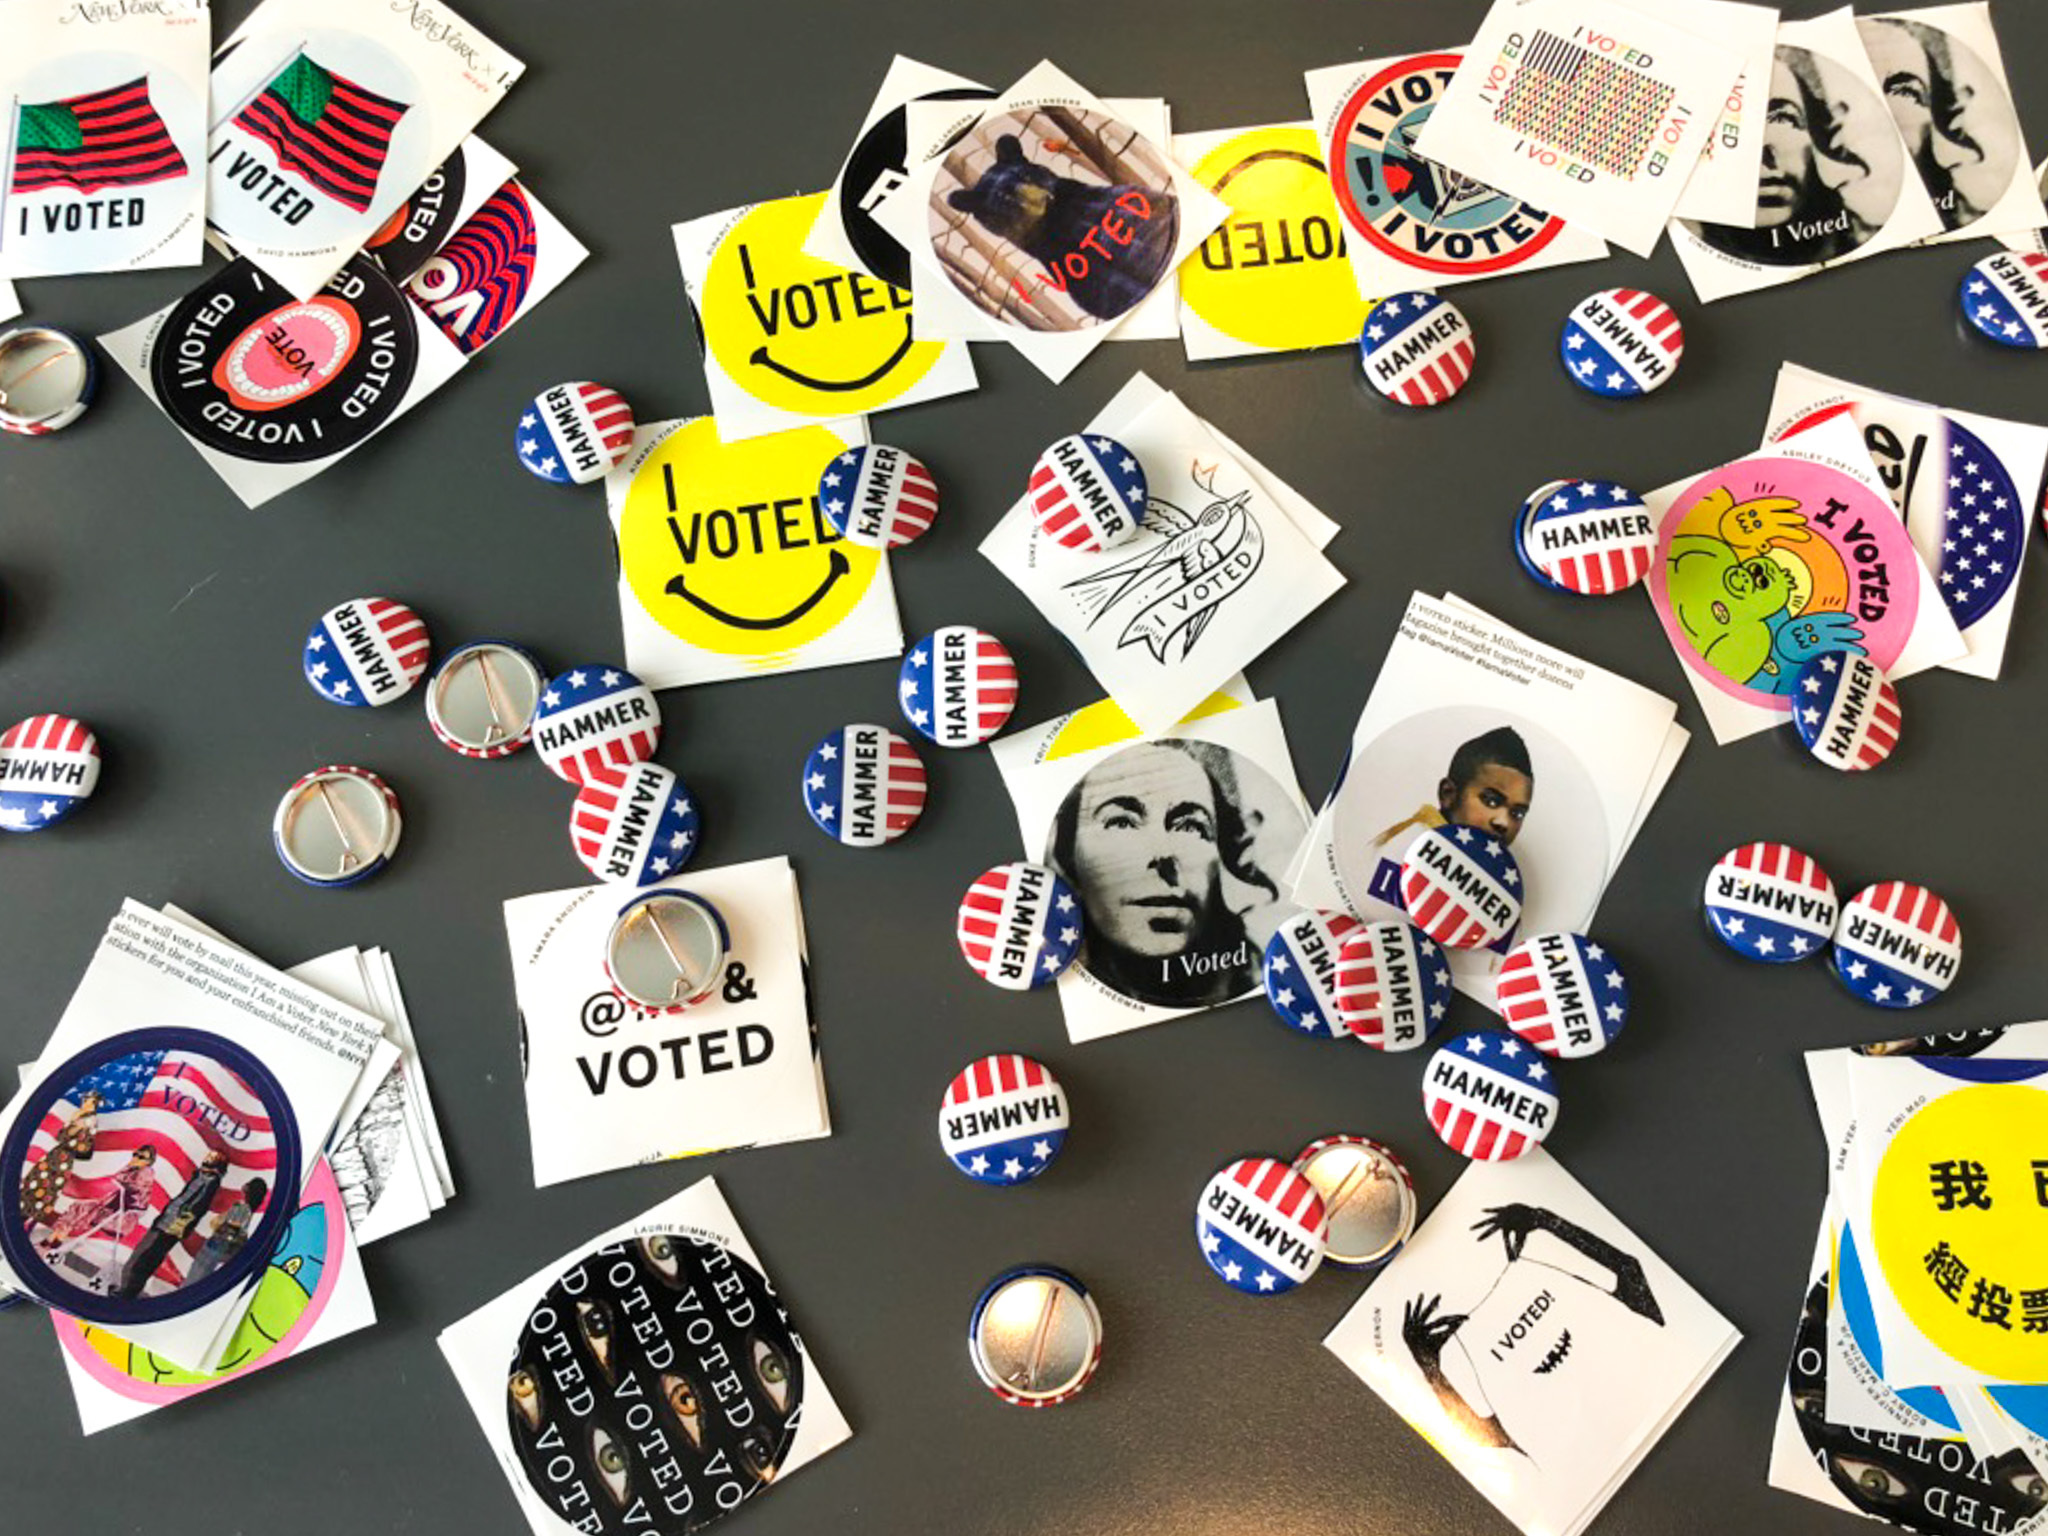 Need another reason to vote? How about these custom “I Voted” stickers from  L.A. landmarks.